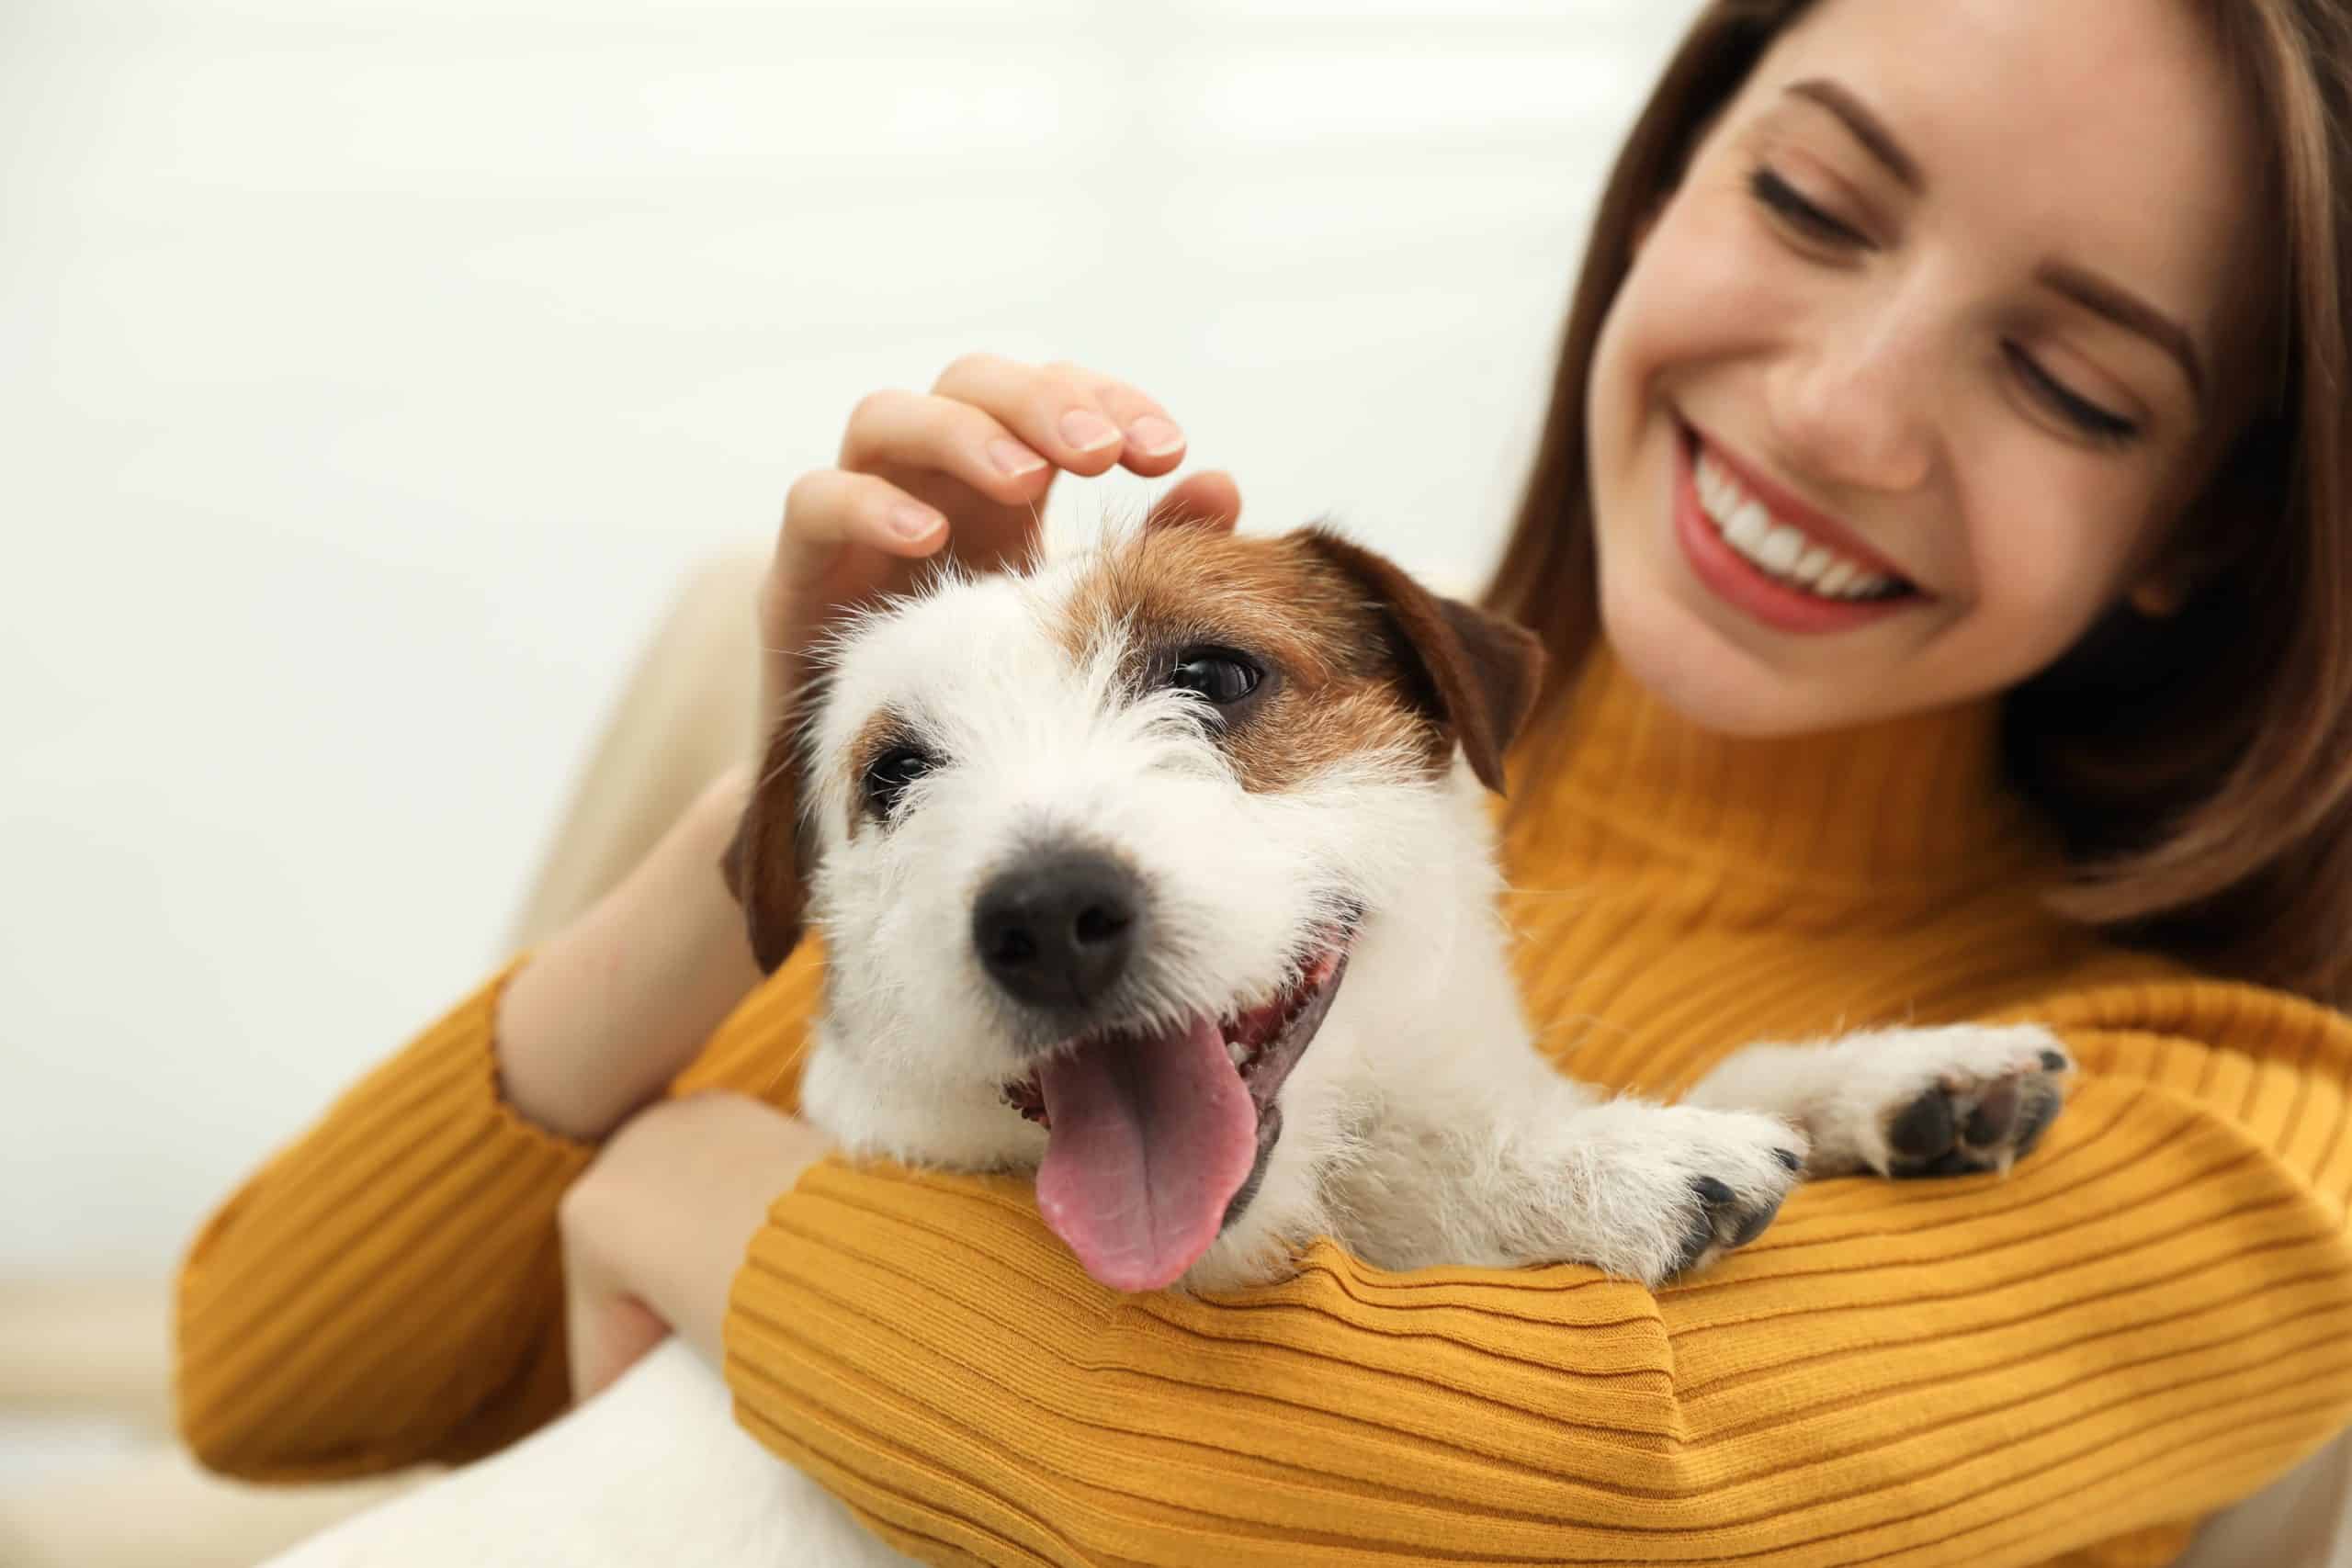 Young woman cuddles Jack Russell Terrier puppy. Young people choose dog breeds that fit their busy lifestyles.